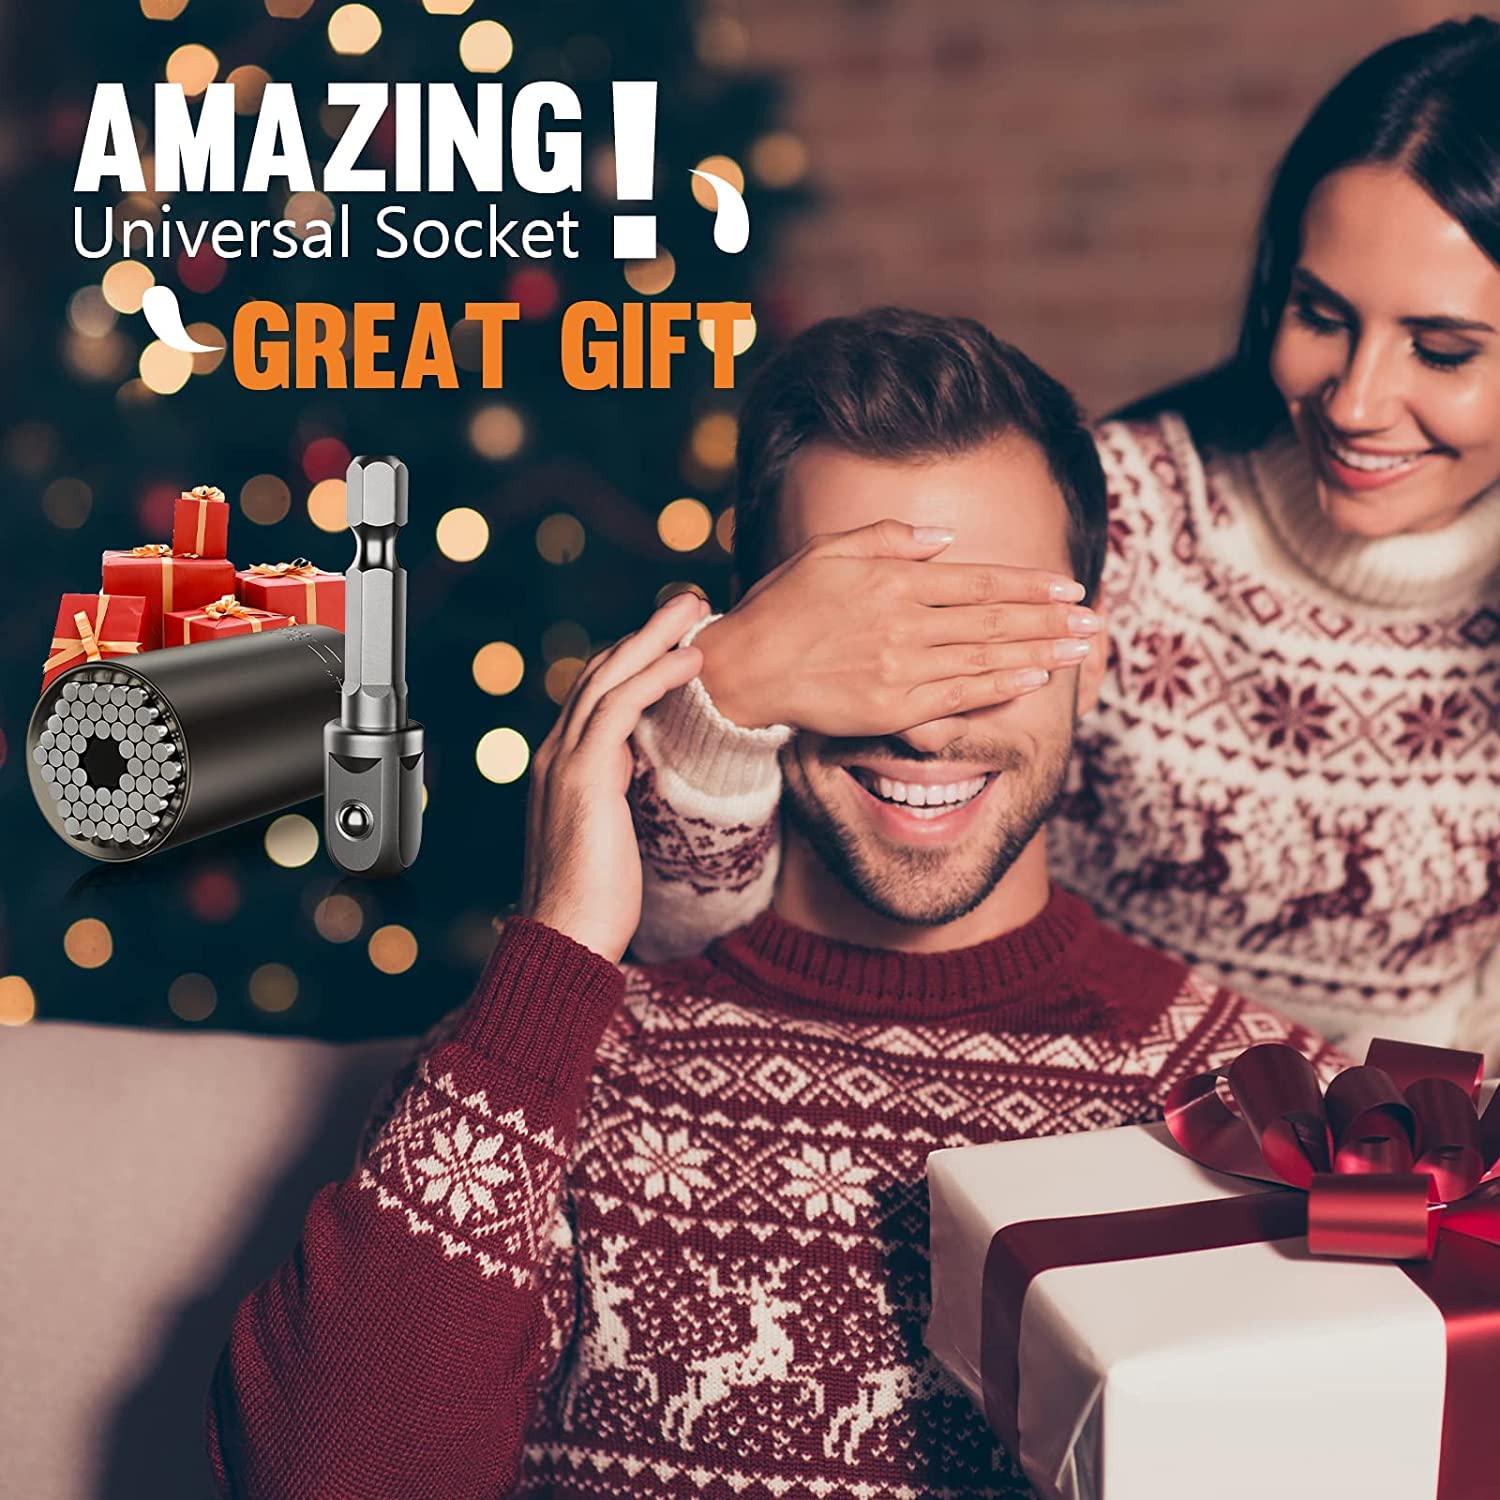 Super Universal Socket Gifts for Men - Tools Christmas Stocking Stuffers for Men Grip Socket Set with Power Drill Adapter, Cool Stuff Ideas Gadgets for Men Dad Him Kids Husband Who Have Everything